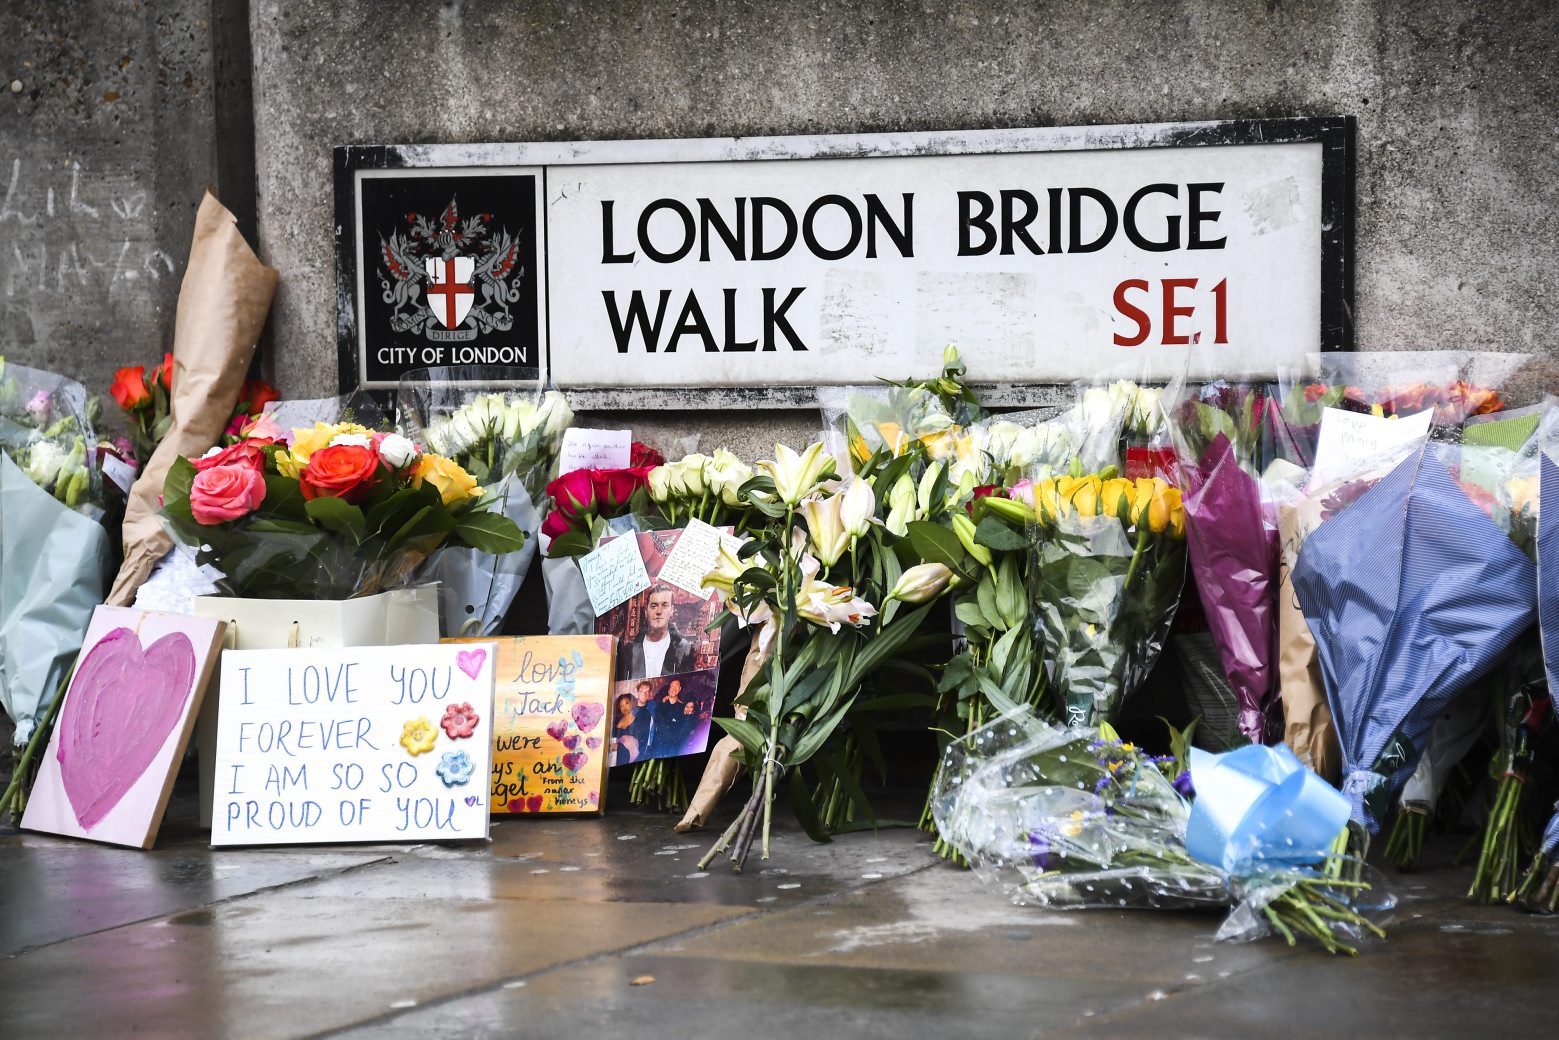 Flowers and a pictures are left in memory of Jack Merritt, the first person named as a victim of Friday's terror attack. A man wearing a fake suicide vest was subdued by bystanders as he went on a knife rampage killing two people and wounding others before being shot dead by police on Friday. (AP Photo/Alberto Pezzali) Britain London Attack